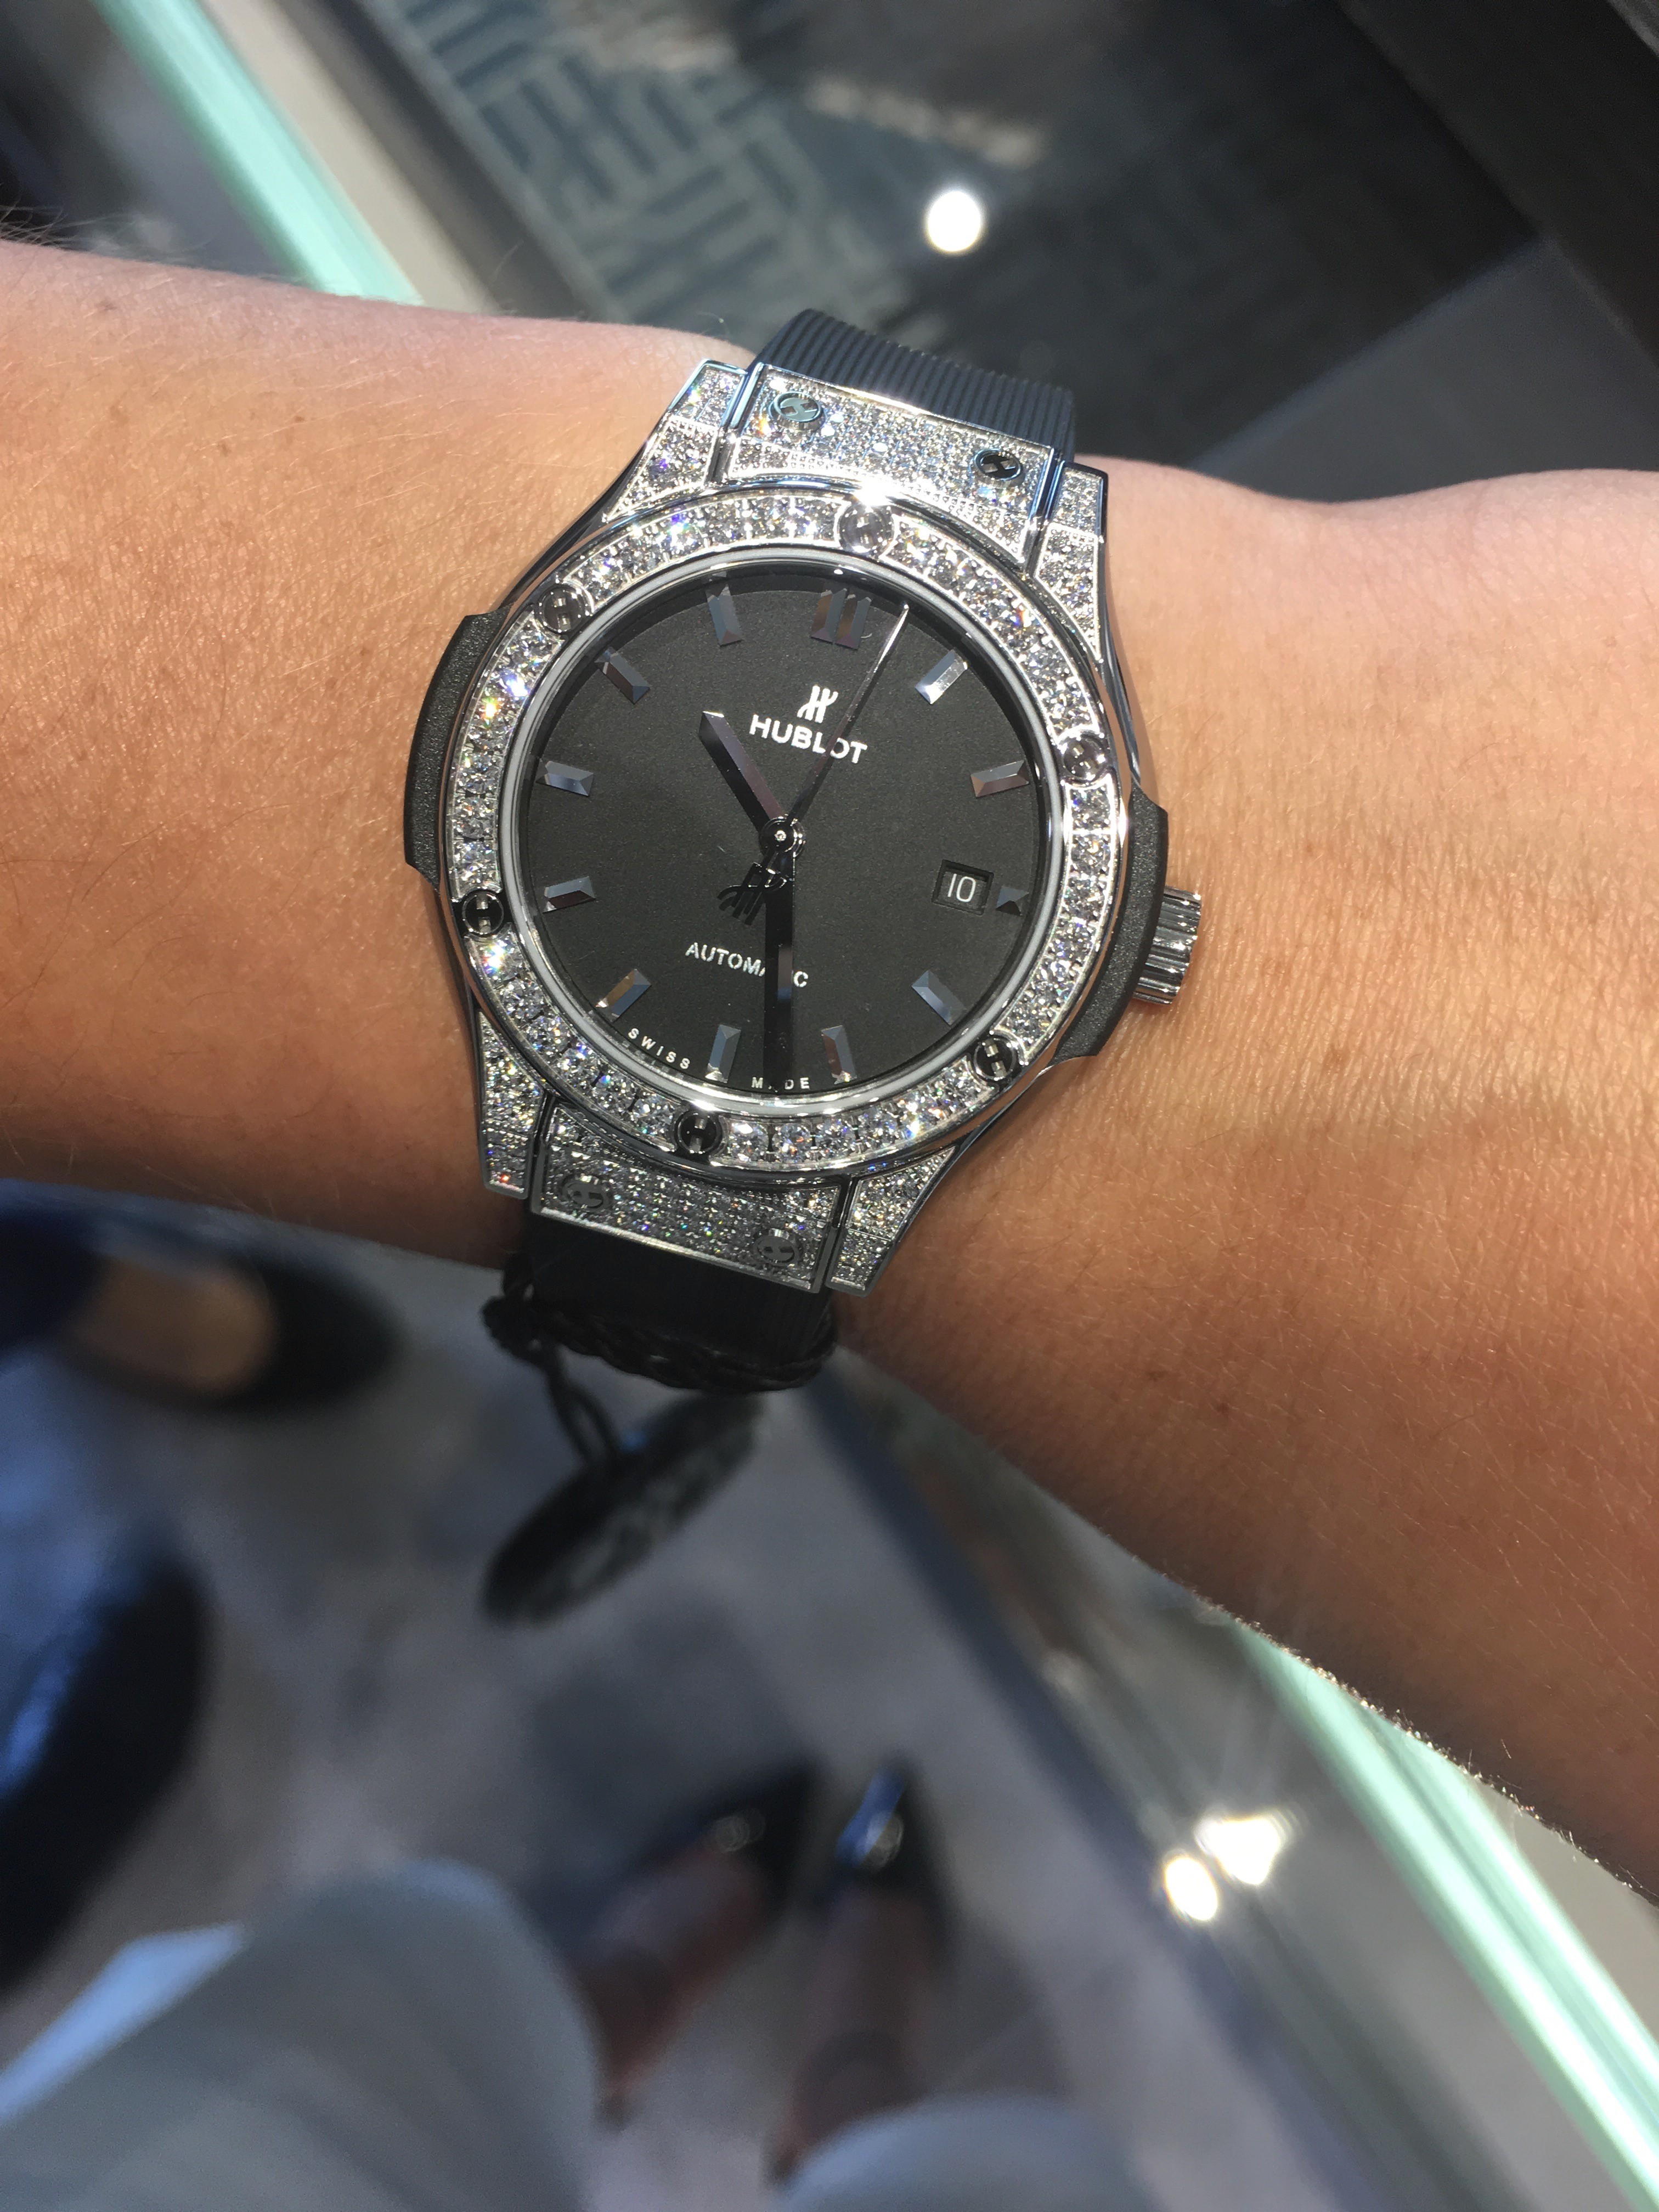 18,000 CHF watch covered with diamonds